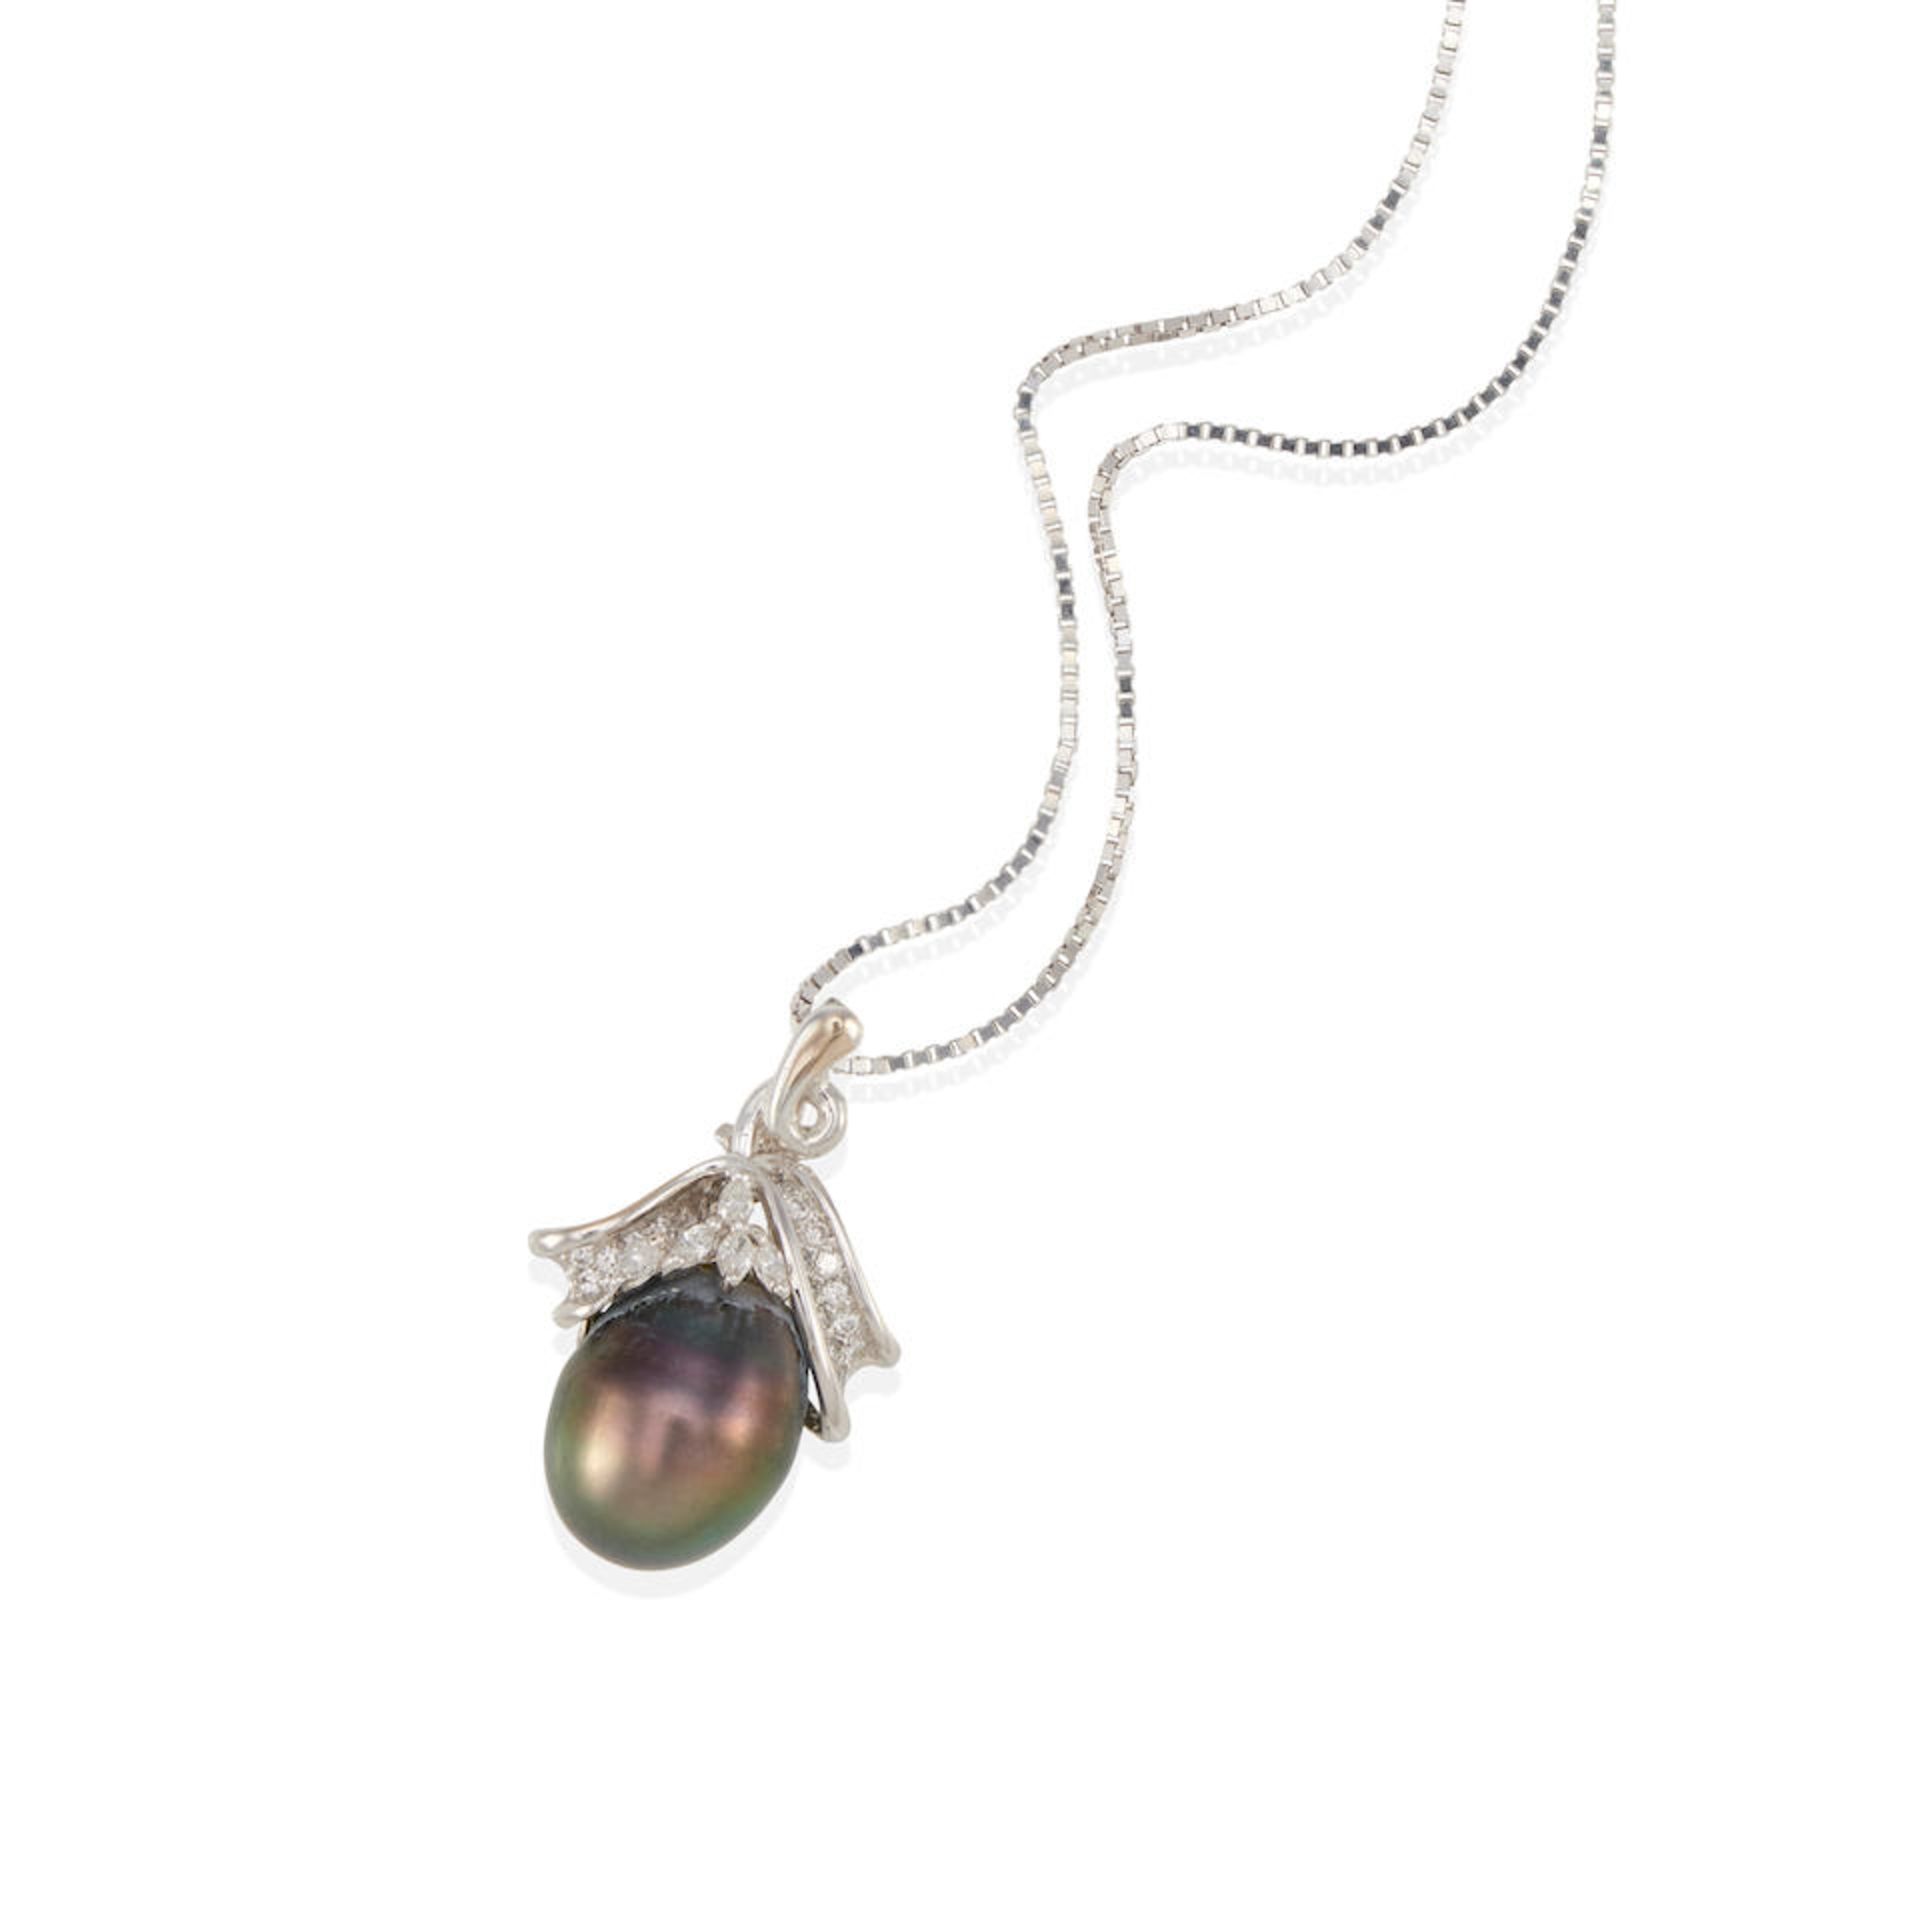 AN 18K WHITE GOLD, BLACK CULTURED PEARL AND DIAMOND PENDANT ENHANCER